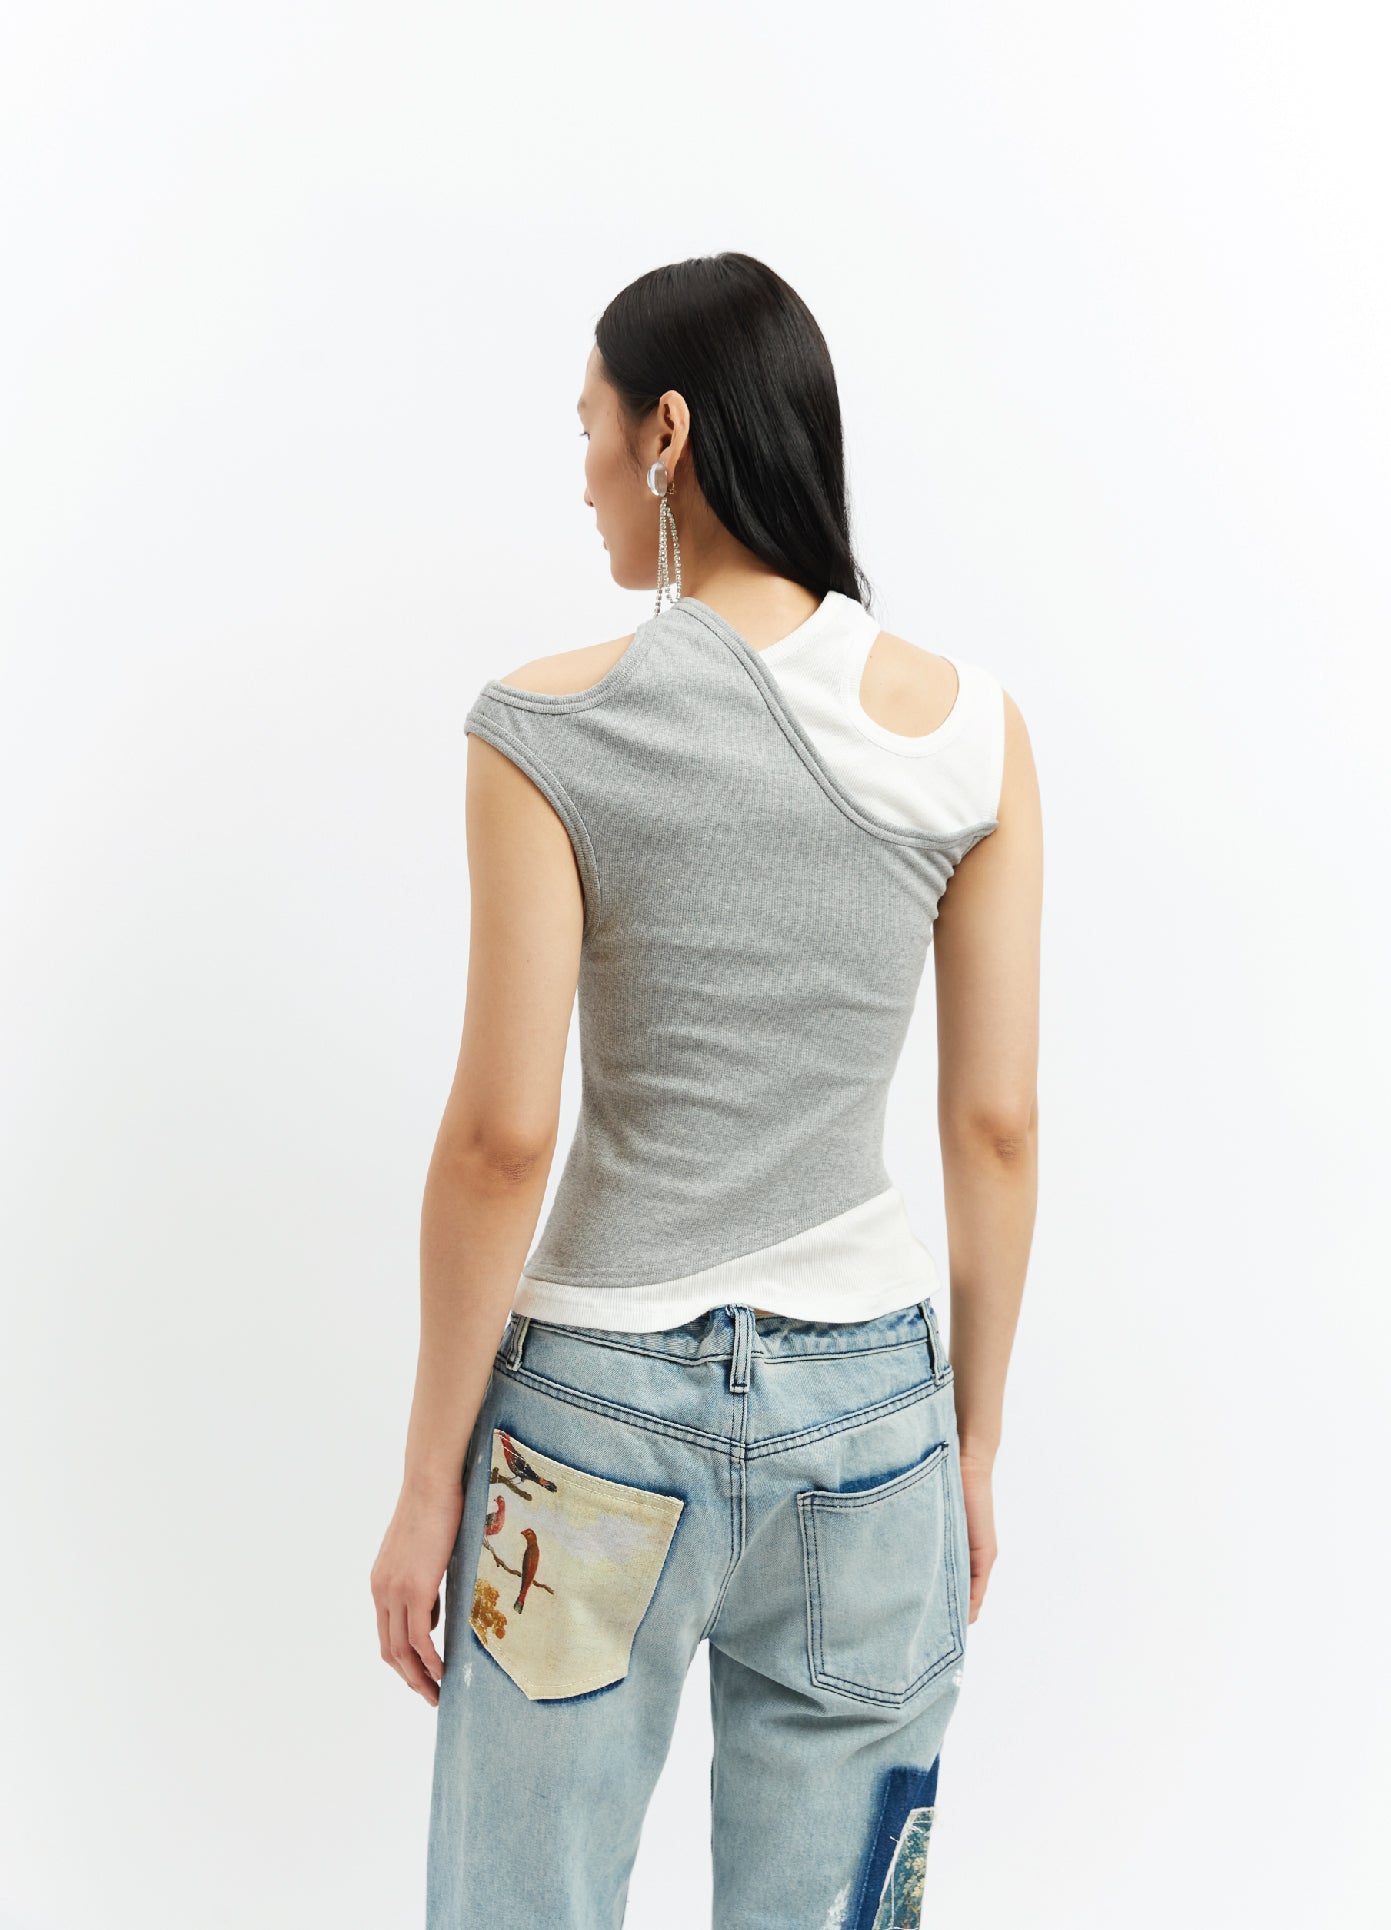 MONSE Double Layer Tank Top in Light Grey and Ivory on Model Back View